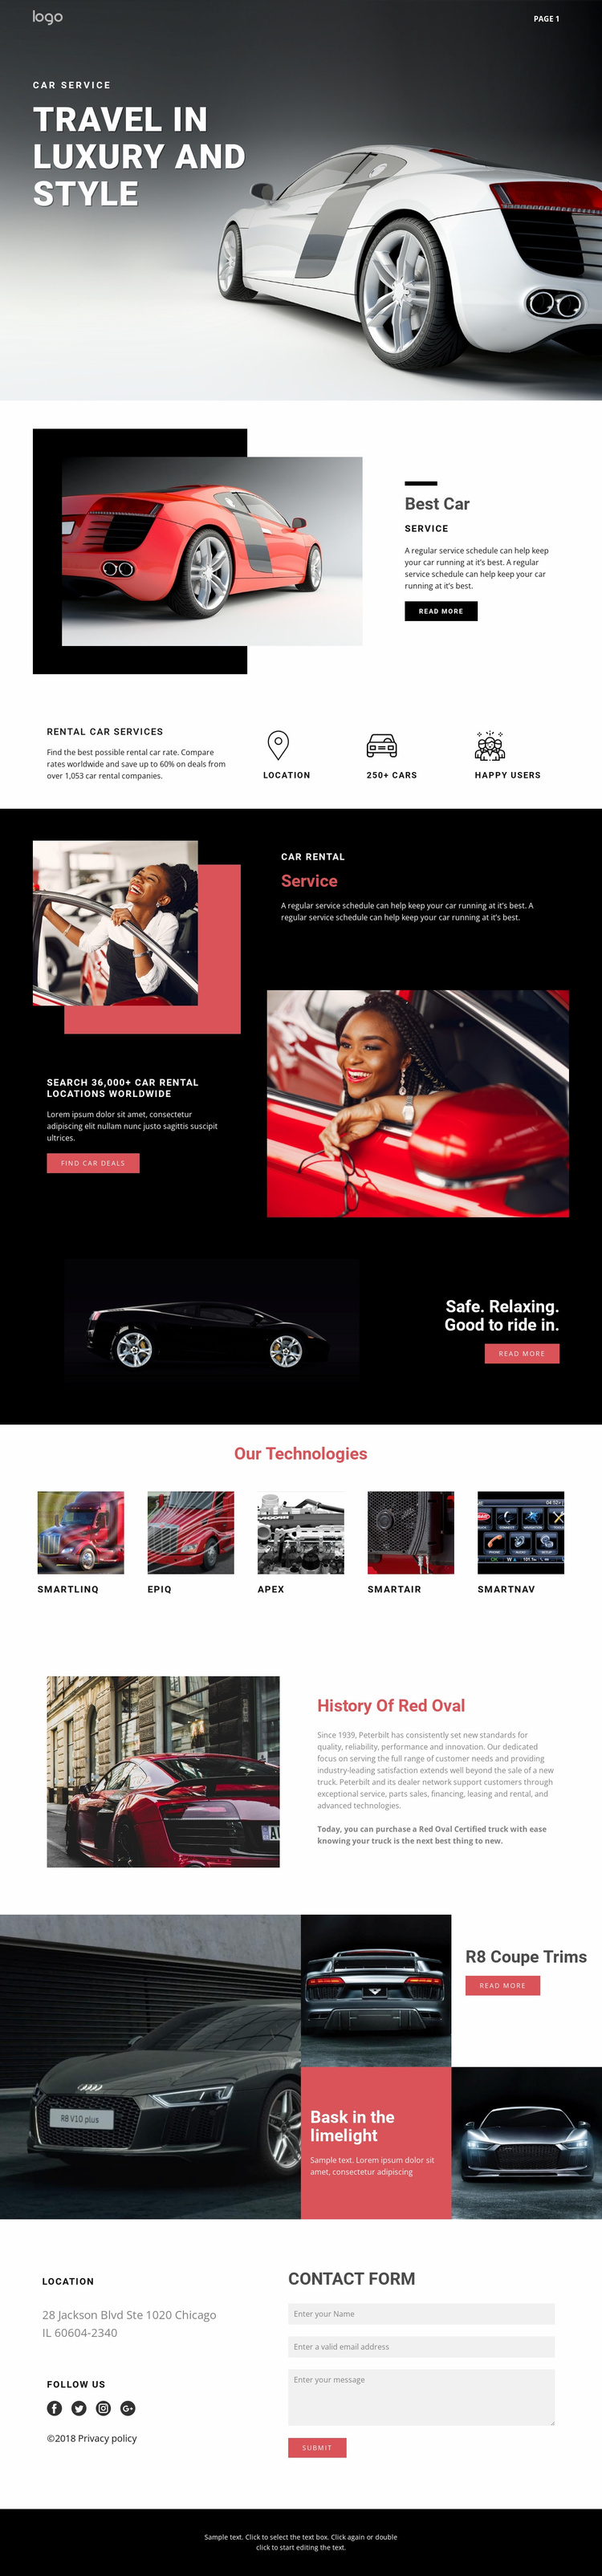 Traveling in luxury cars Website Template